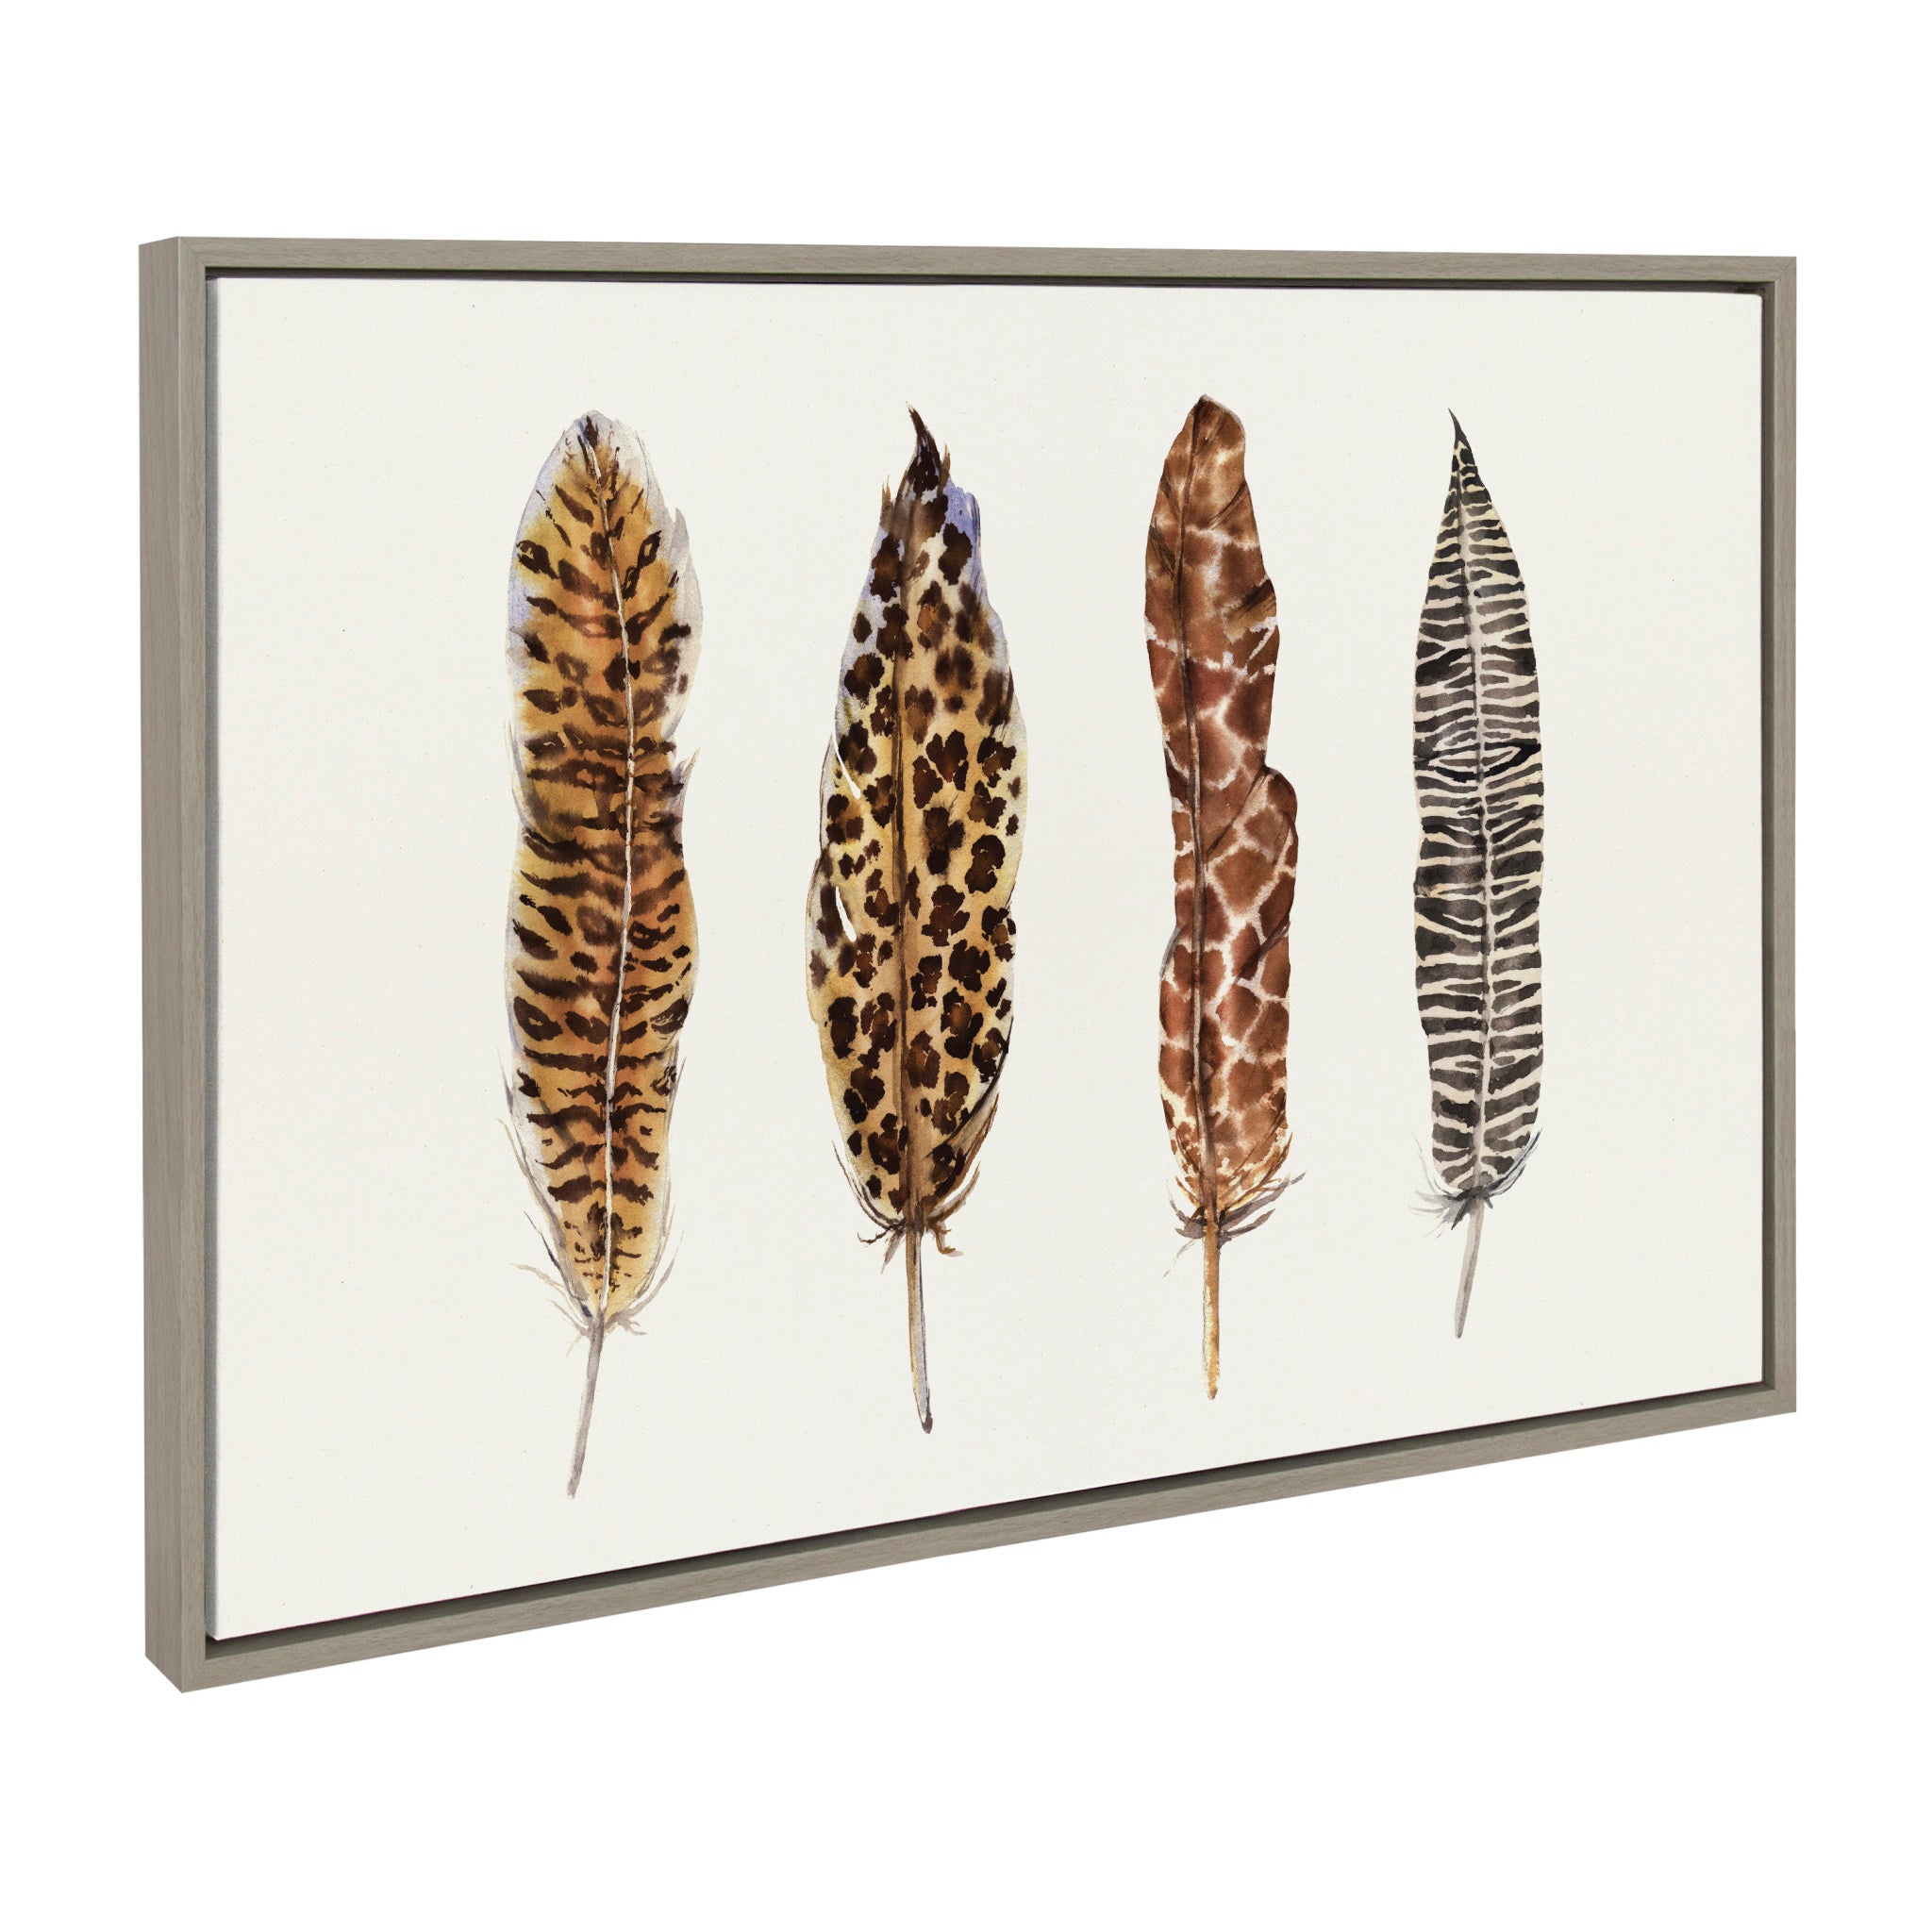 Sylvie African Feathers Framed Canvas by Maja Mitrovic of Makes My Day Happy